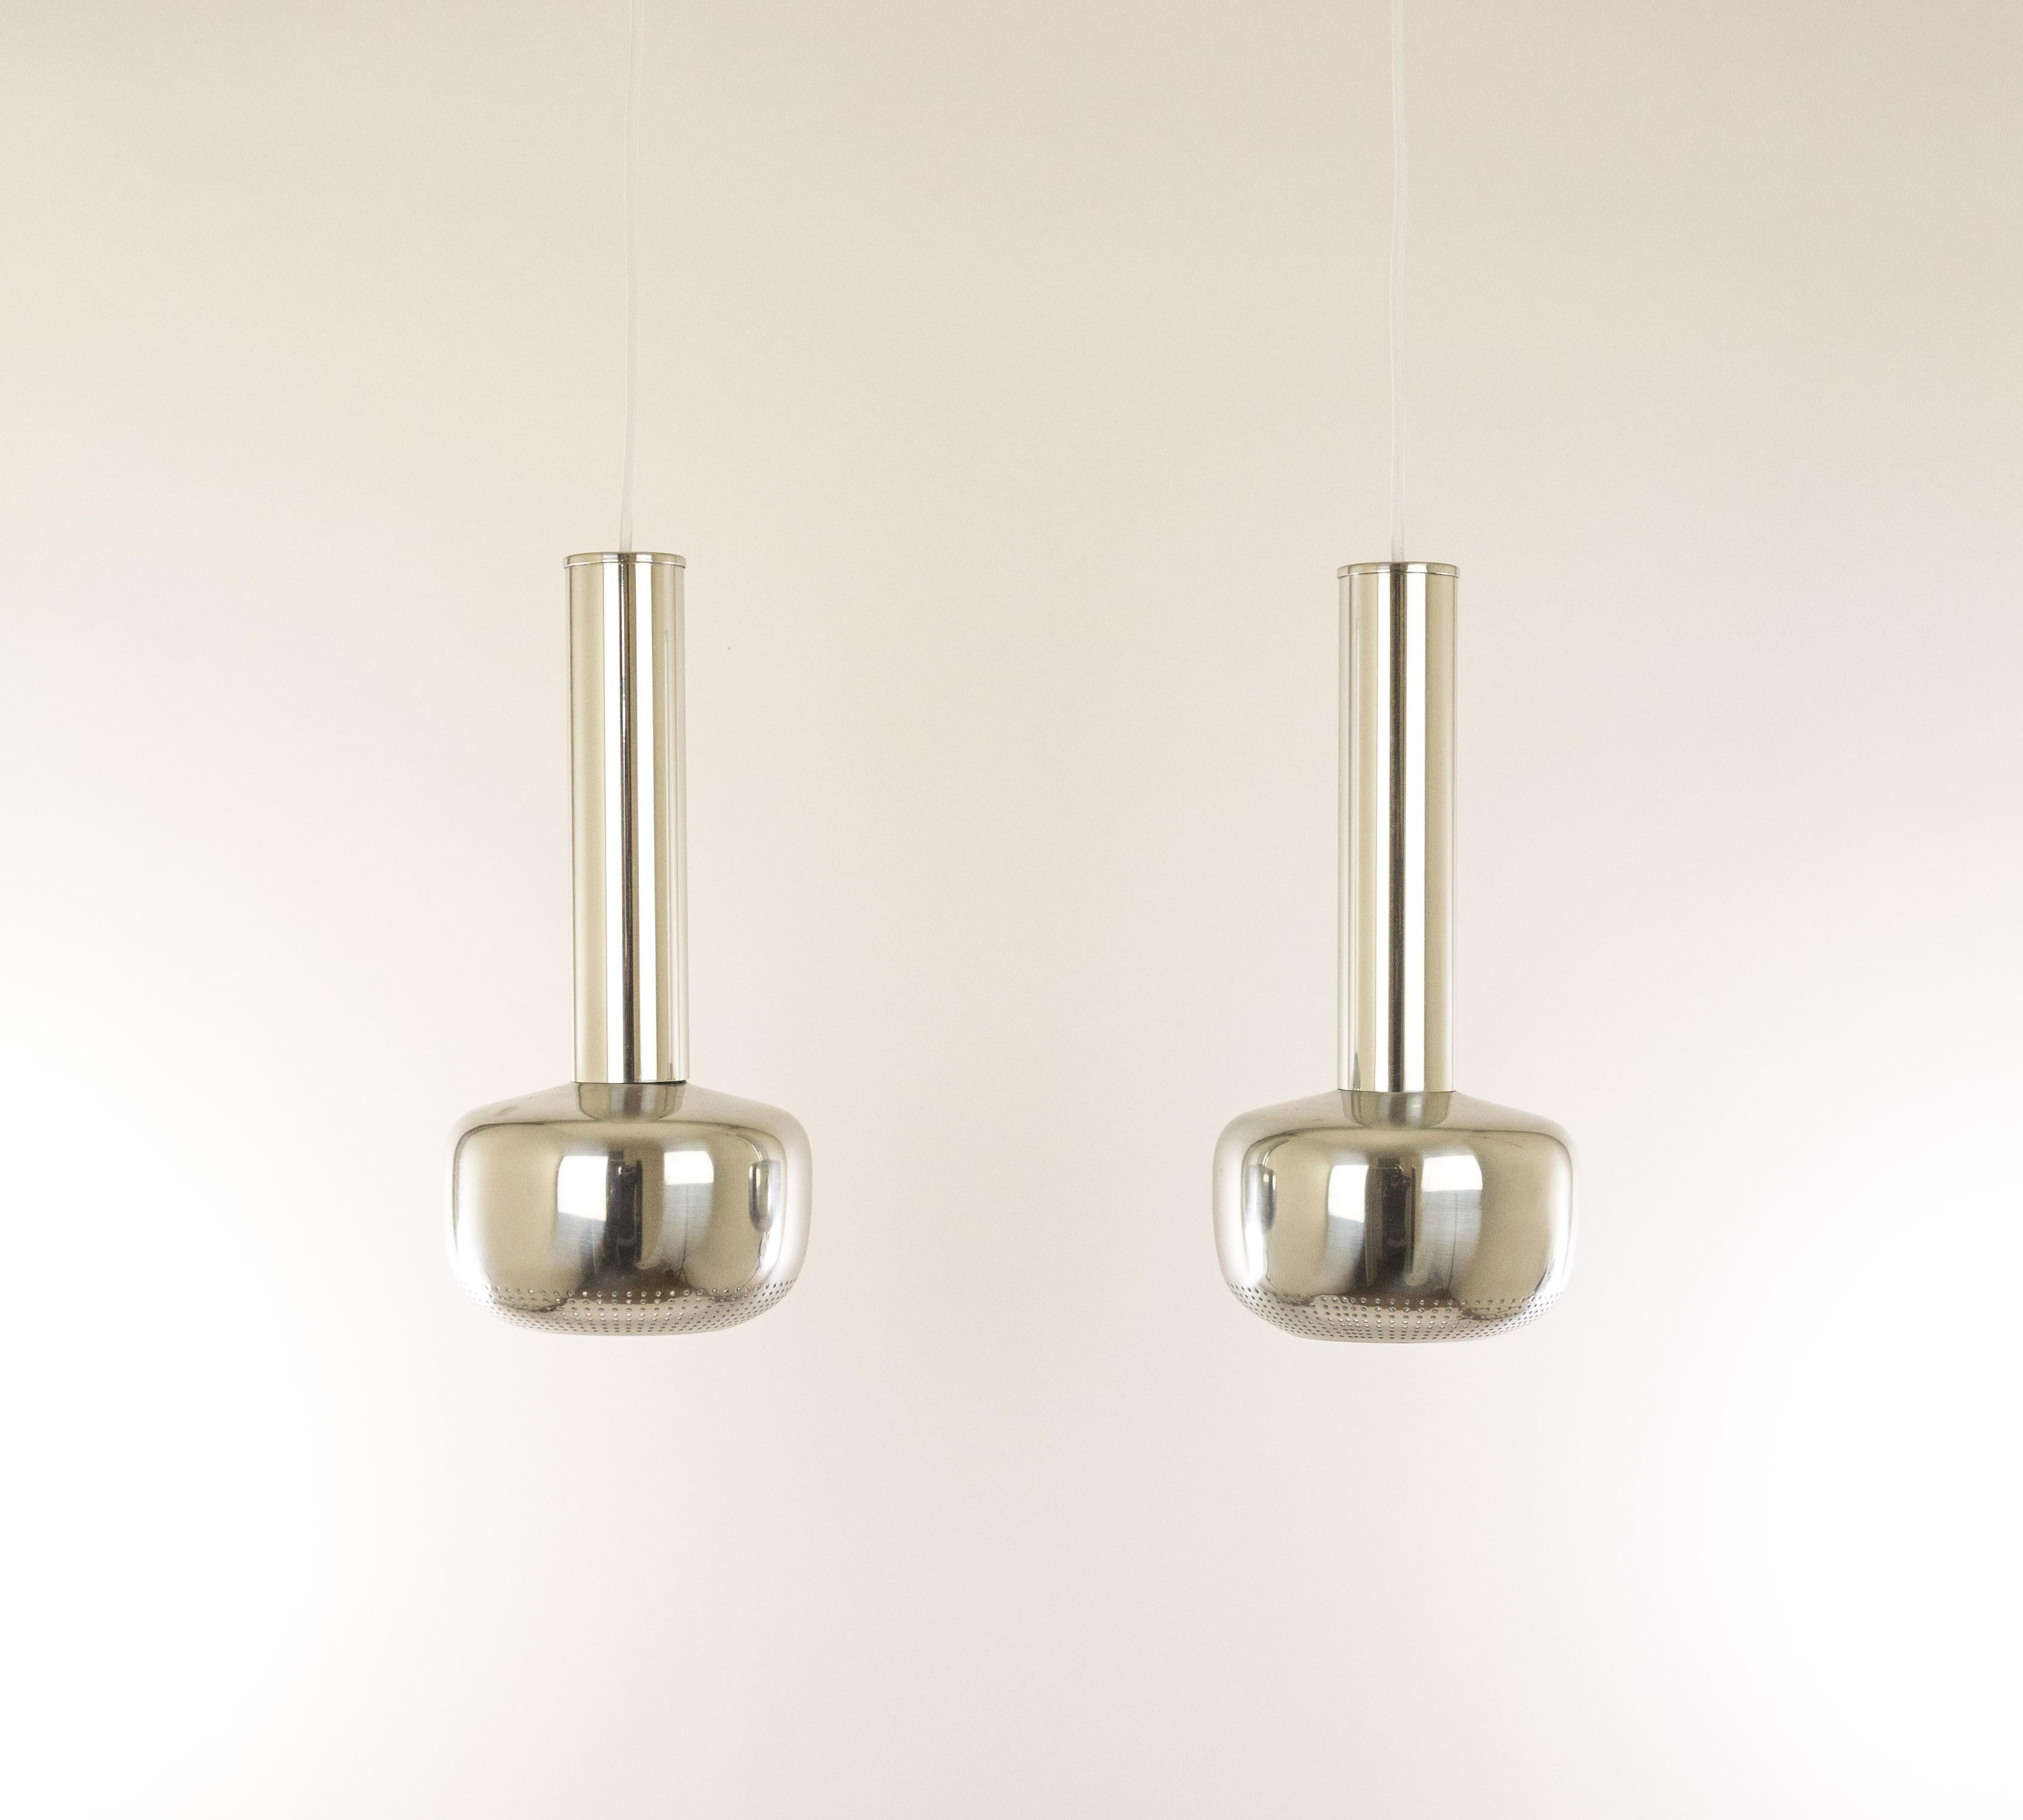 Pair of Guldpendel designed in 1956 by Vilhelm Lauritzen for Louis Poulsen. A pair of chromed aluminium pendants consisting of a cylindrical top and a perforated reflector at the bottom. Originally the Guldpendel was designed with a brass lacquered